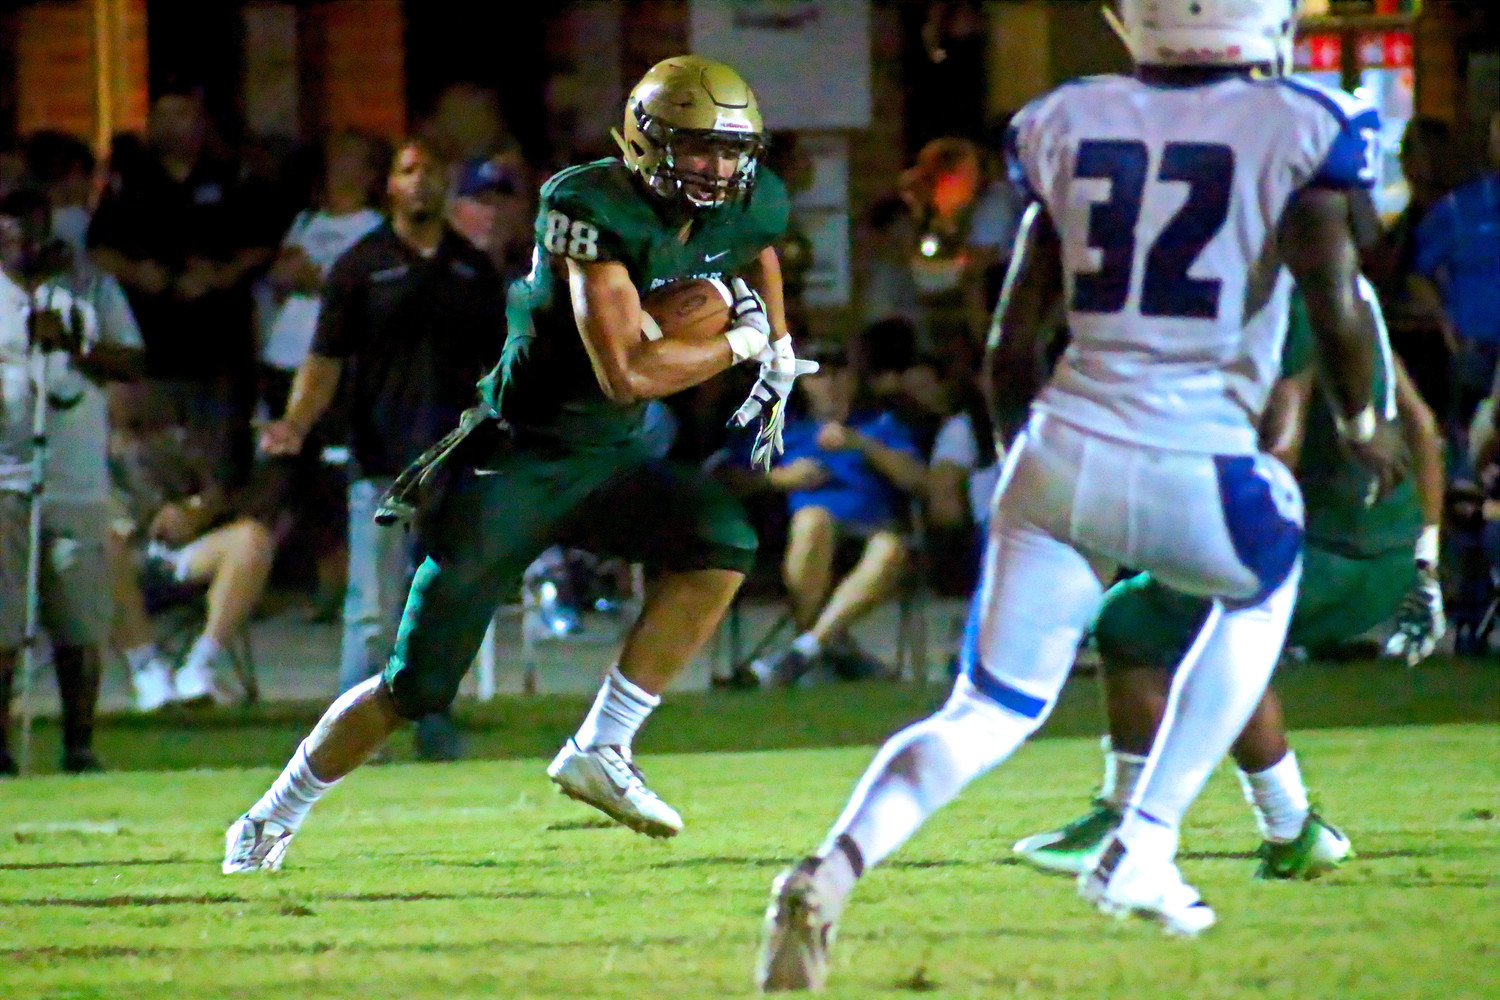 One key figure in the 2017 version will be returning tight end Nick Ferendo, who has become a reliable, over -the-middle pass catcher for either of two Fleming Island quarterbacks.